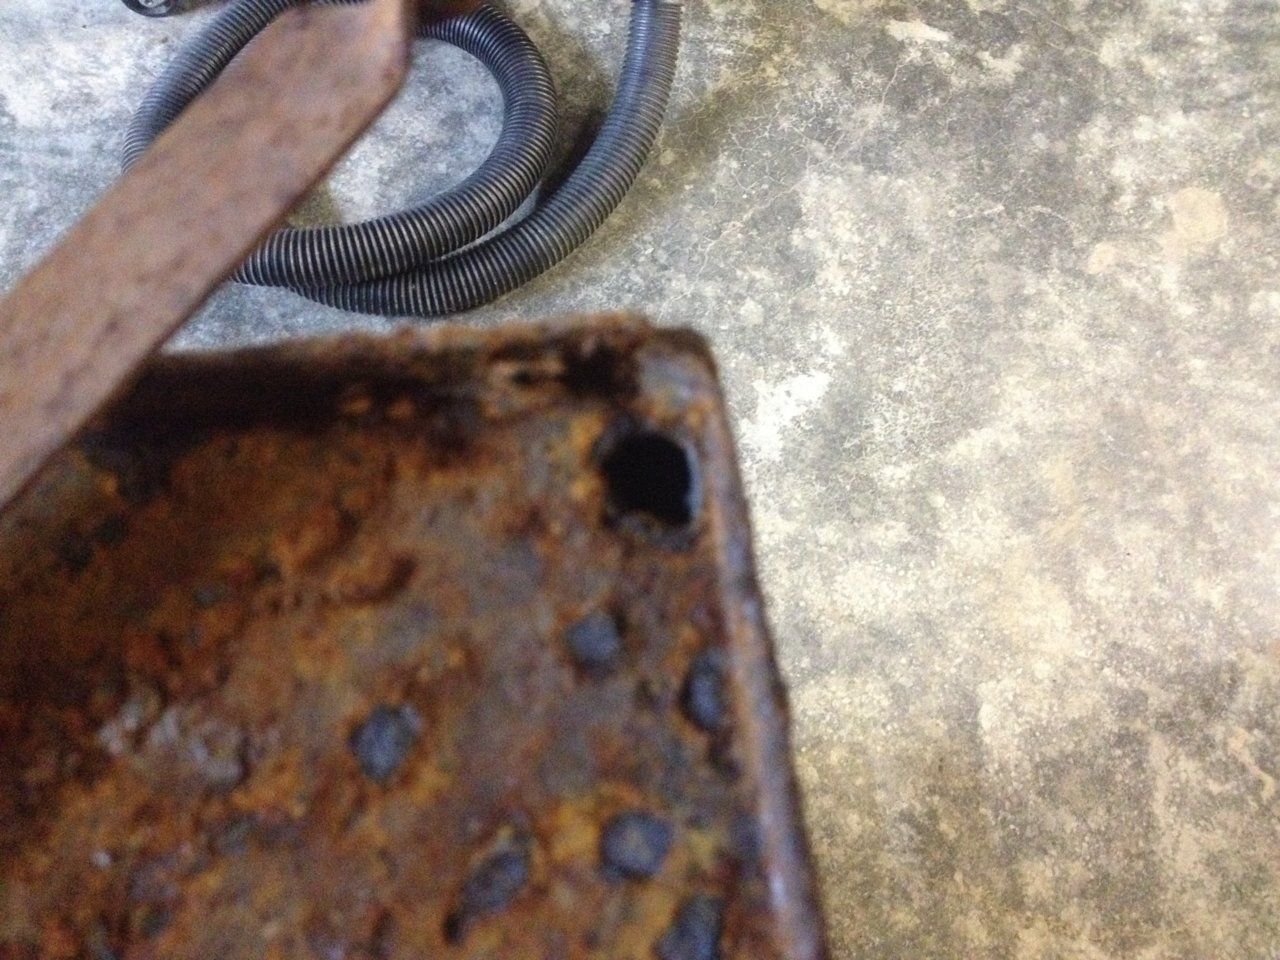 Hole in top where metal is rusted through